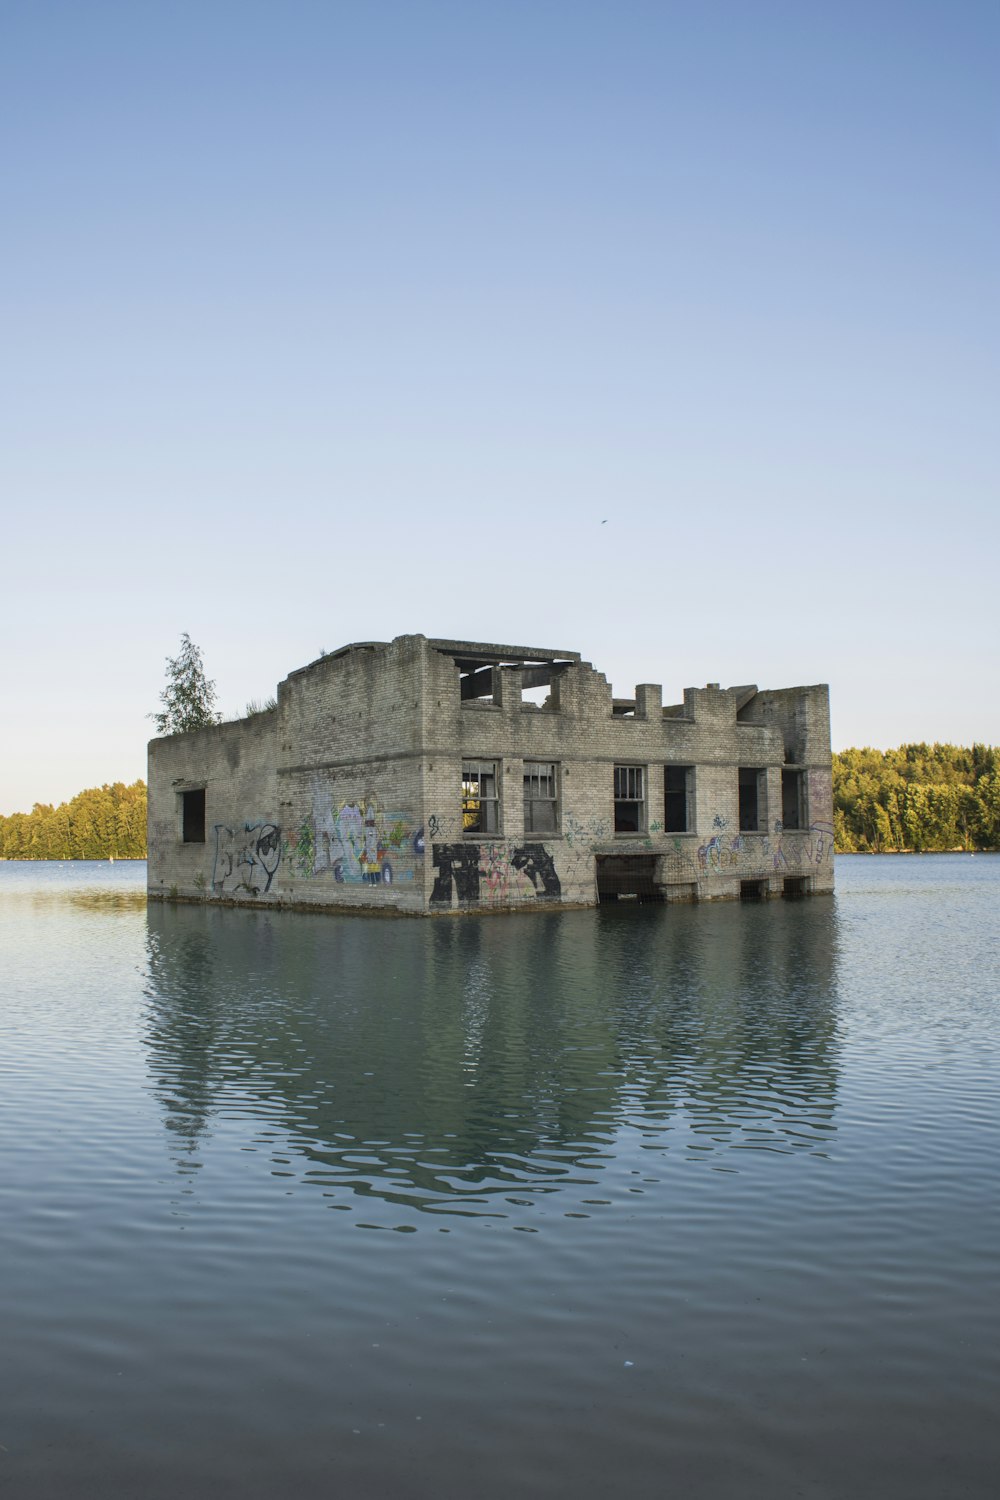 grey house ruins submerged in water under clear blue sky